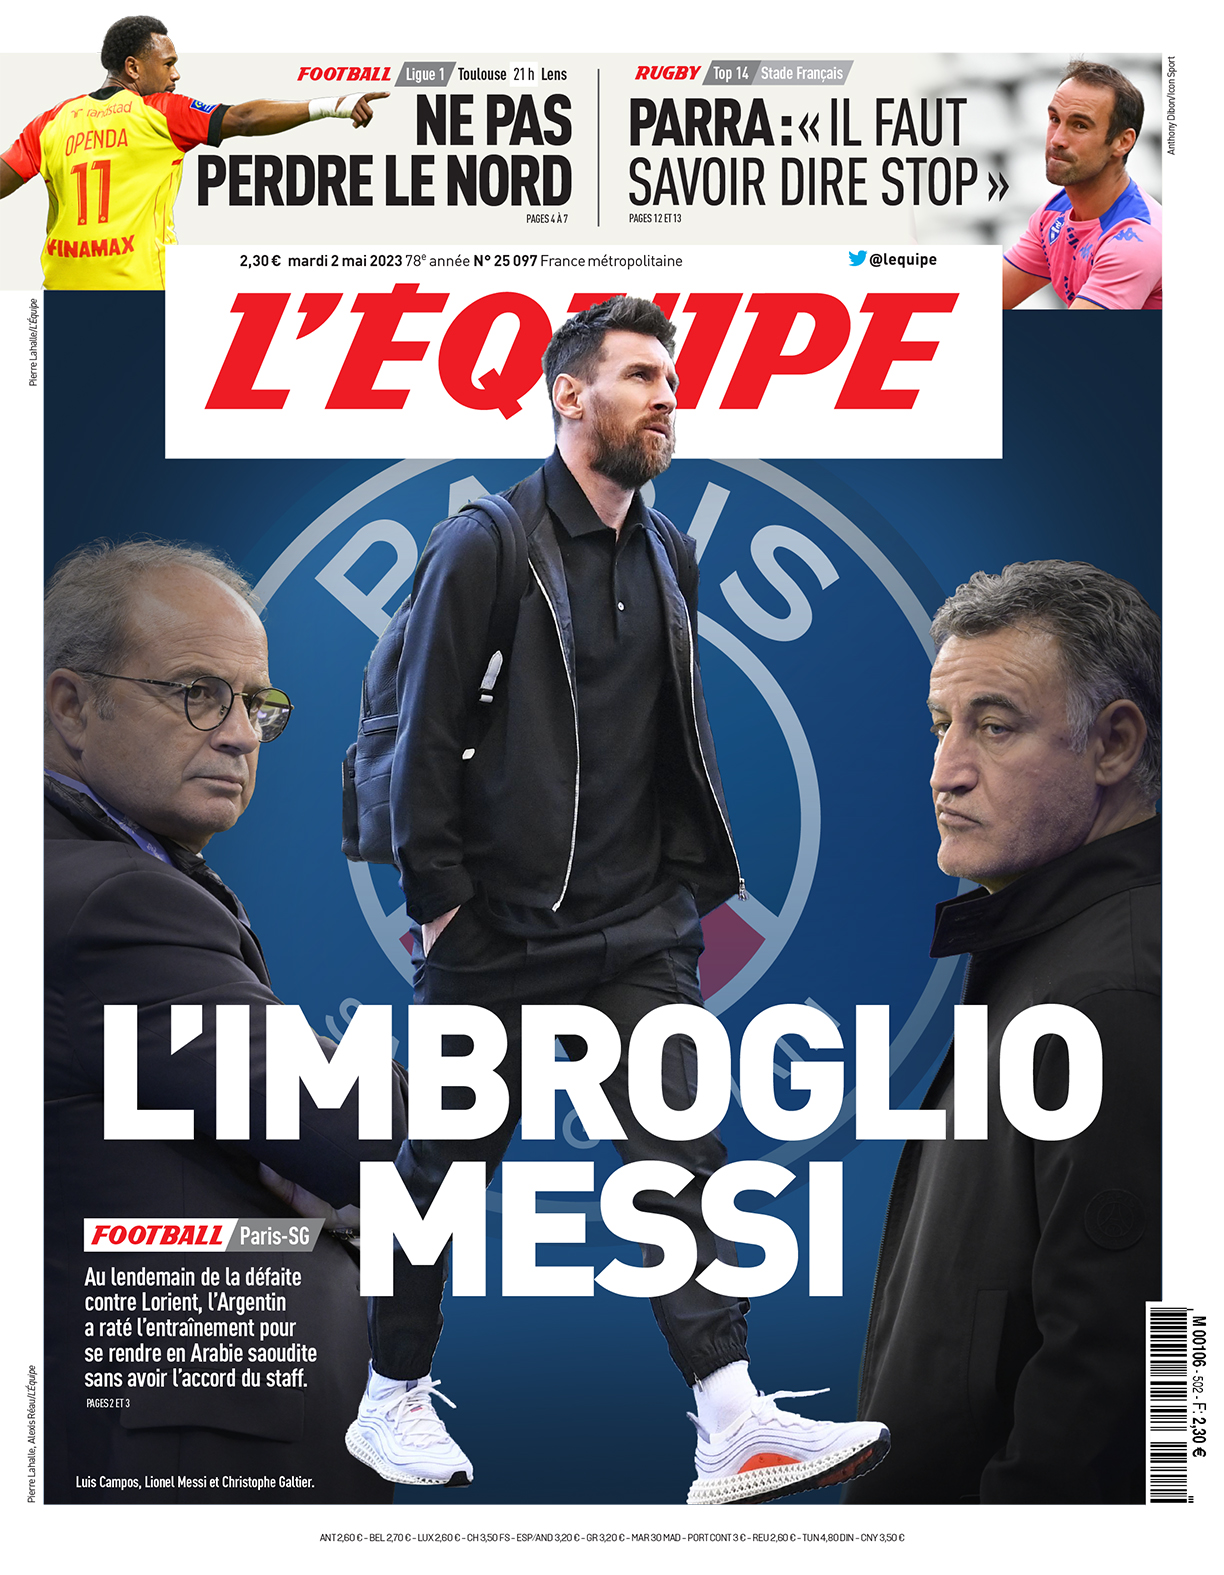 The strong cover of the French newspaper L'equipe against Lionel Messi for his trip to Saudi Arabia